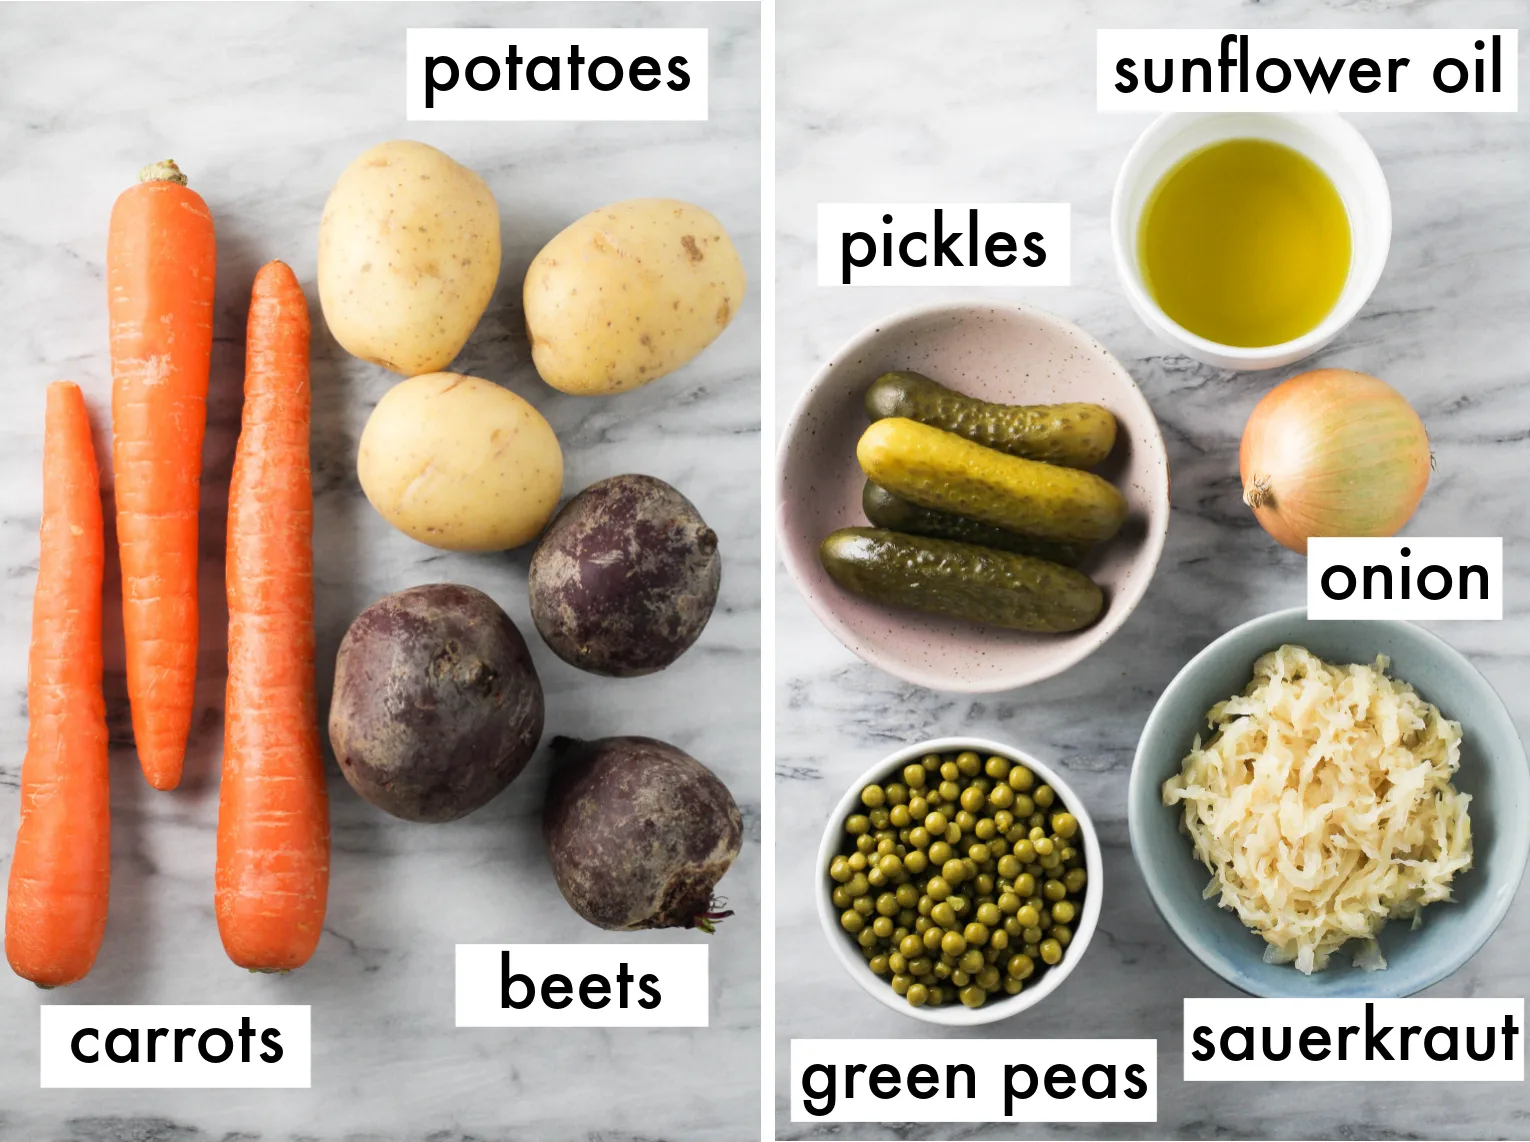 Two side-by-side images of the ingredients labeled as followes: potatoes, carrots, beets, pickles, sunflower oil, onion, green peas, sauerkraut.